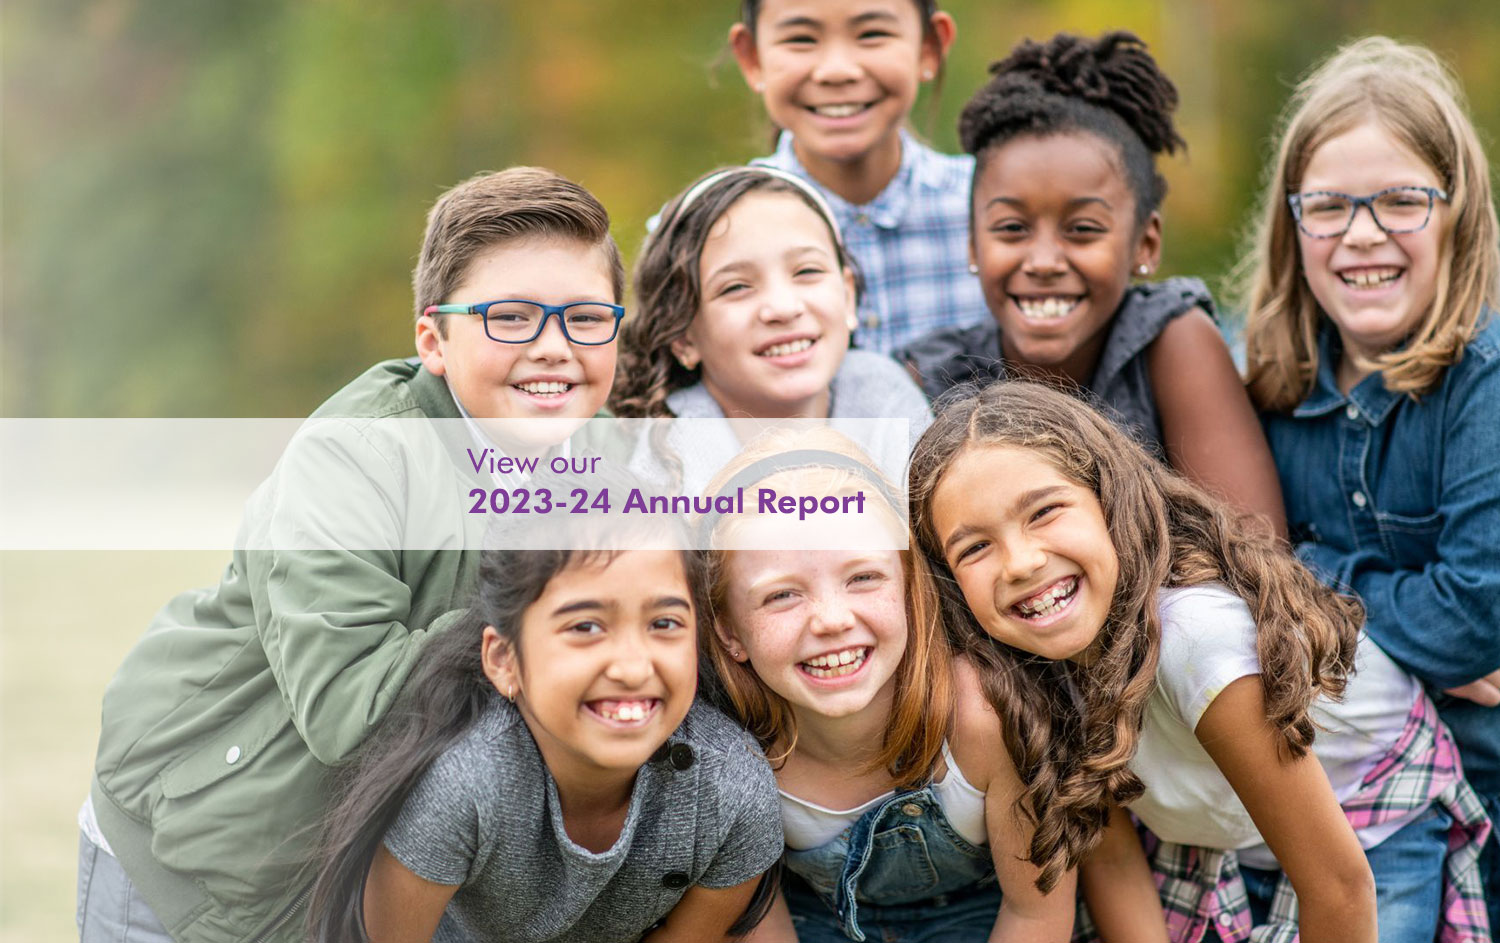 View our 2023-24 Annual Report